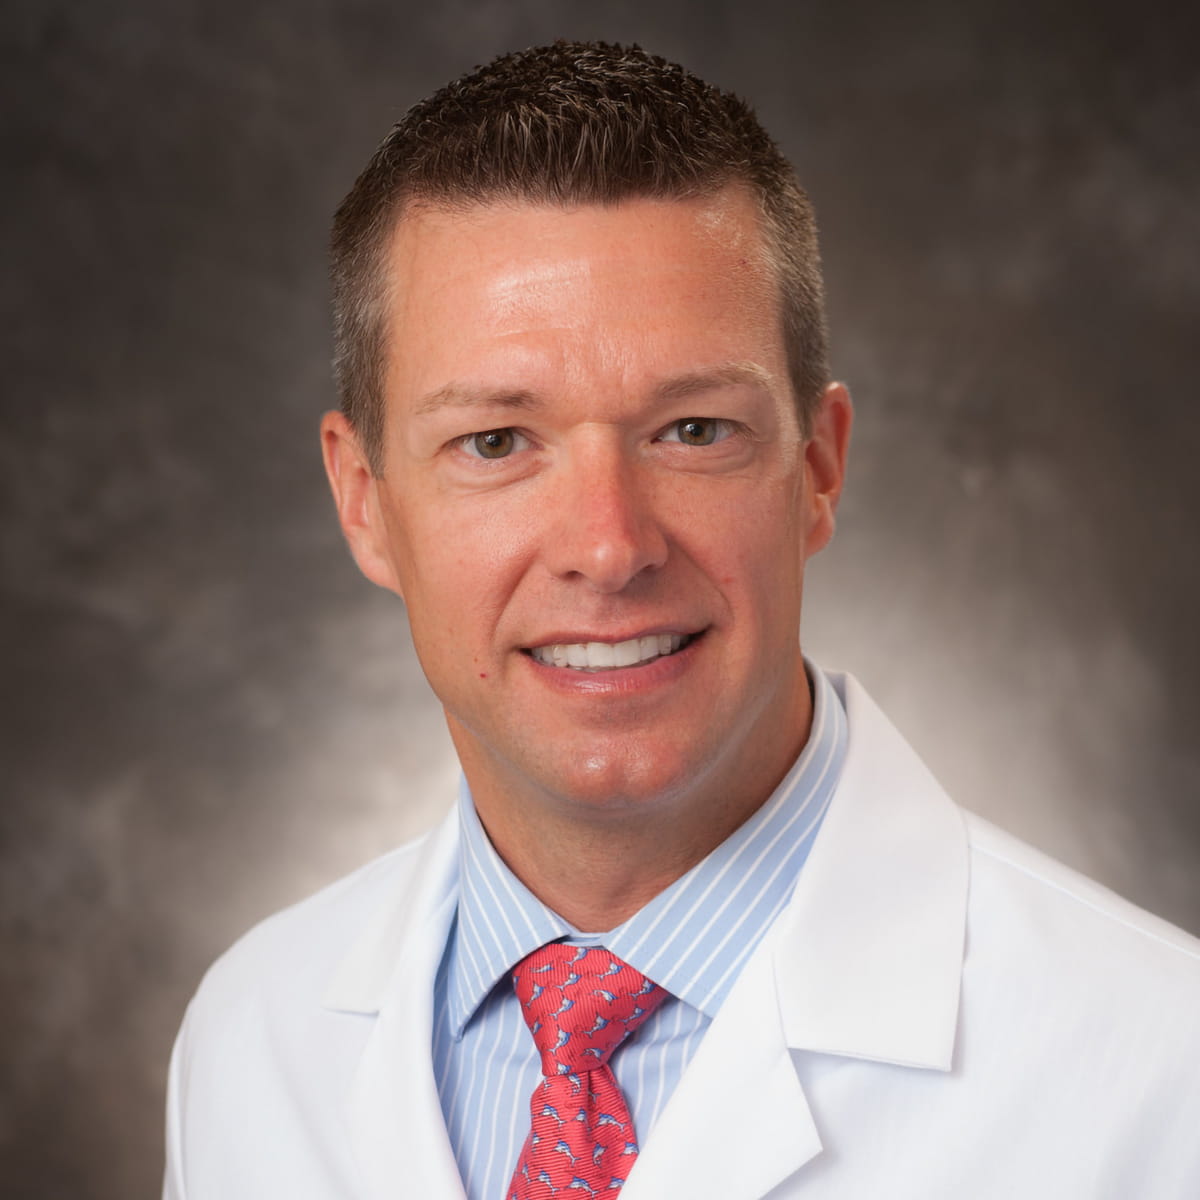 A friendly headshot of Danny Branstetter, MD